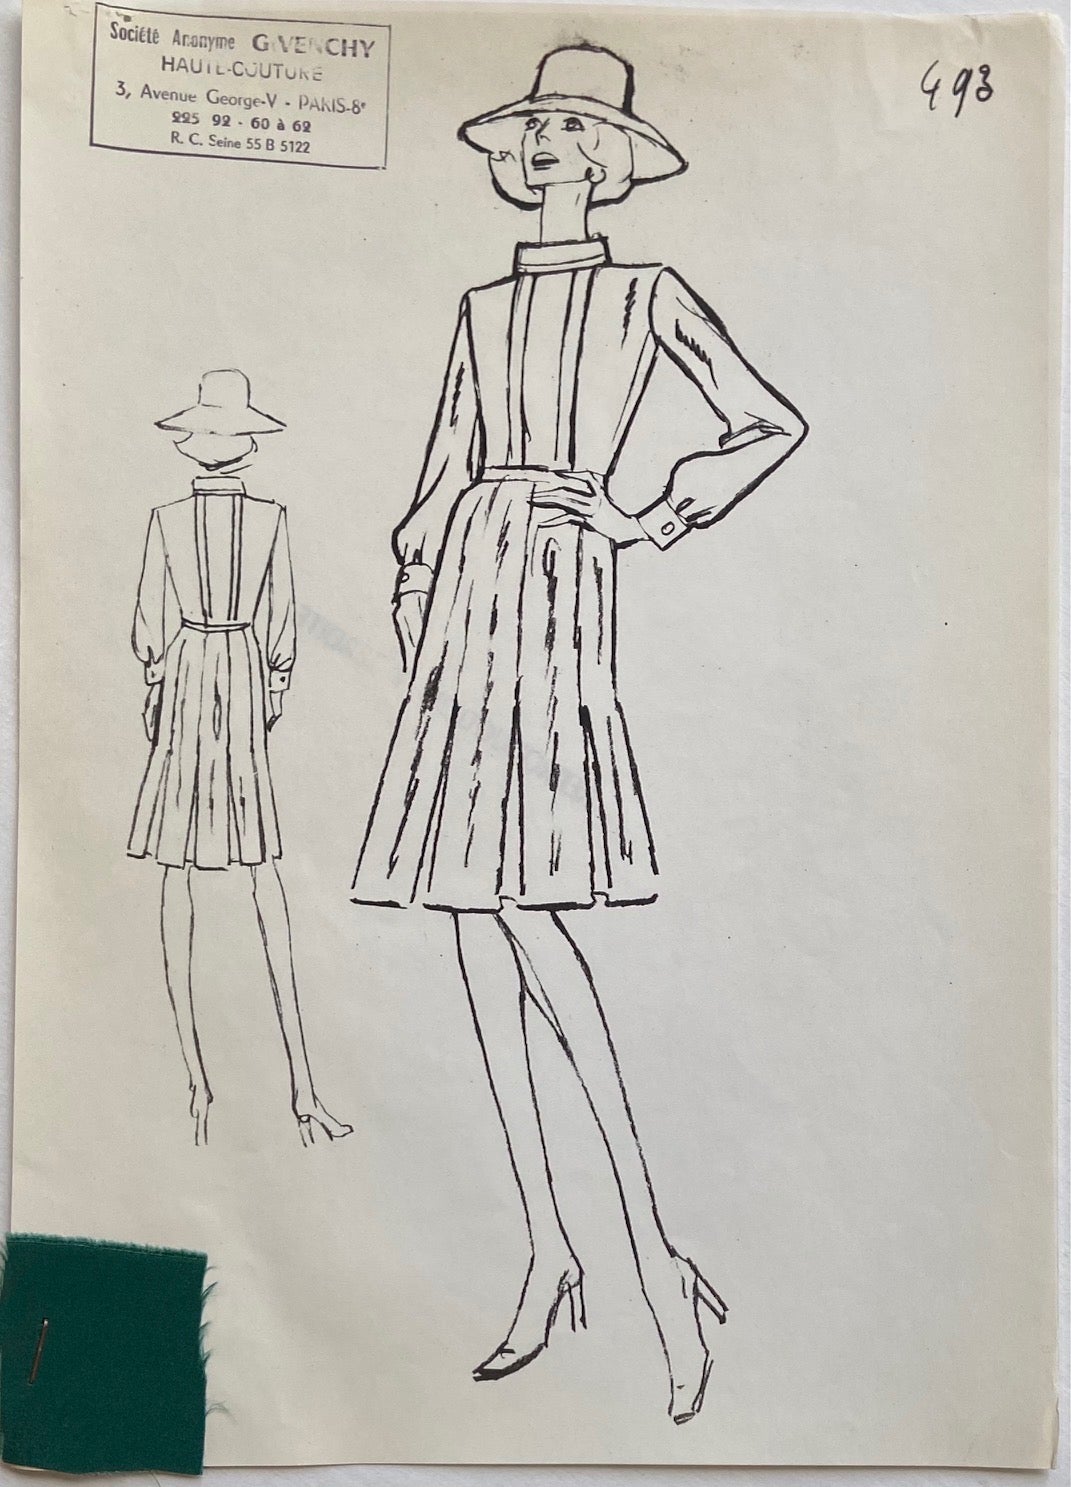 Croquis Plate 493 by Hubert de GIVENCHY on Argosy Book Store